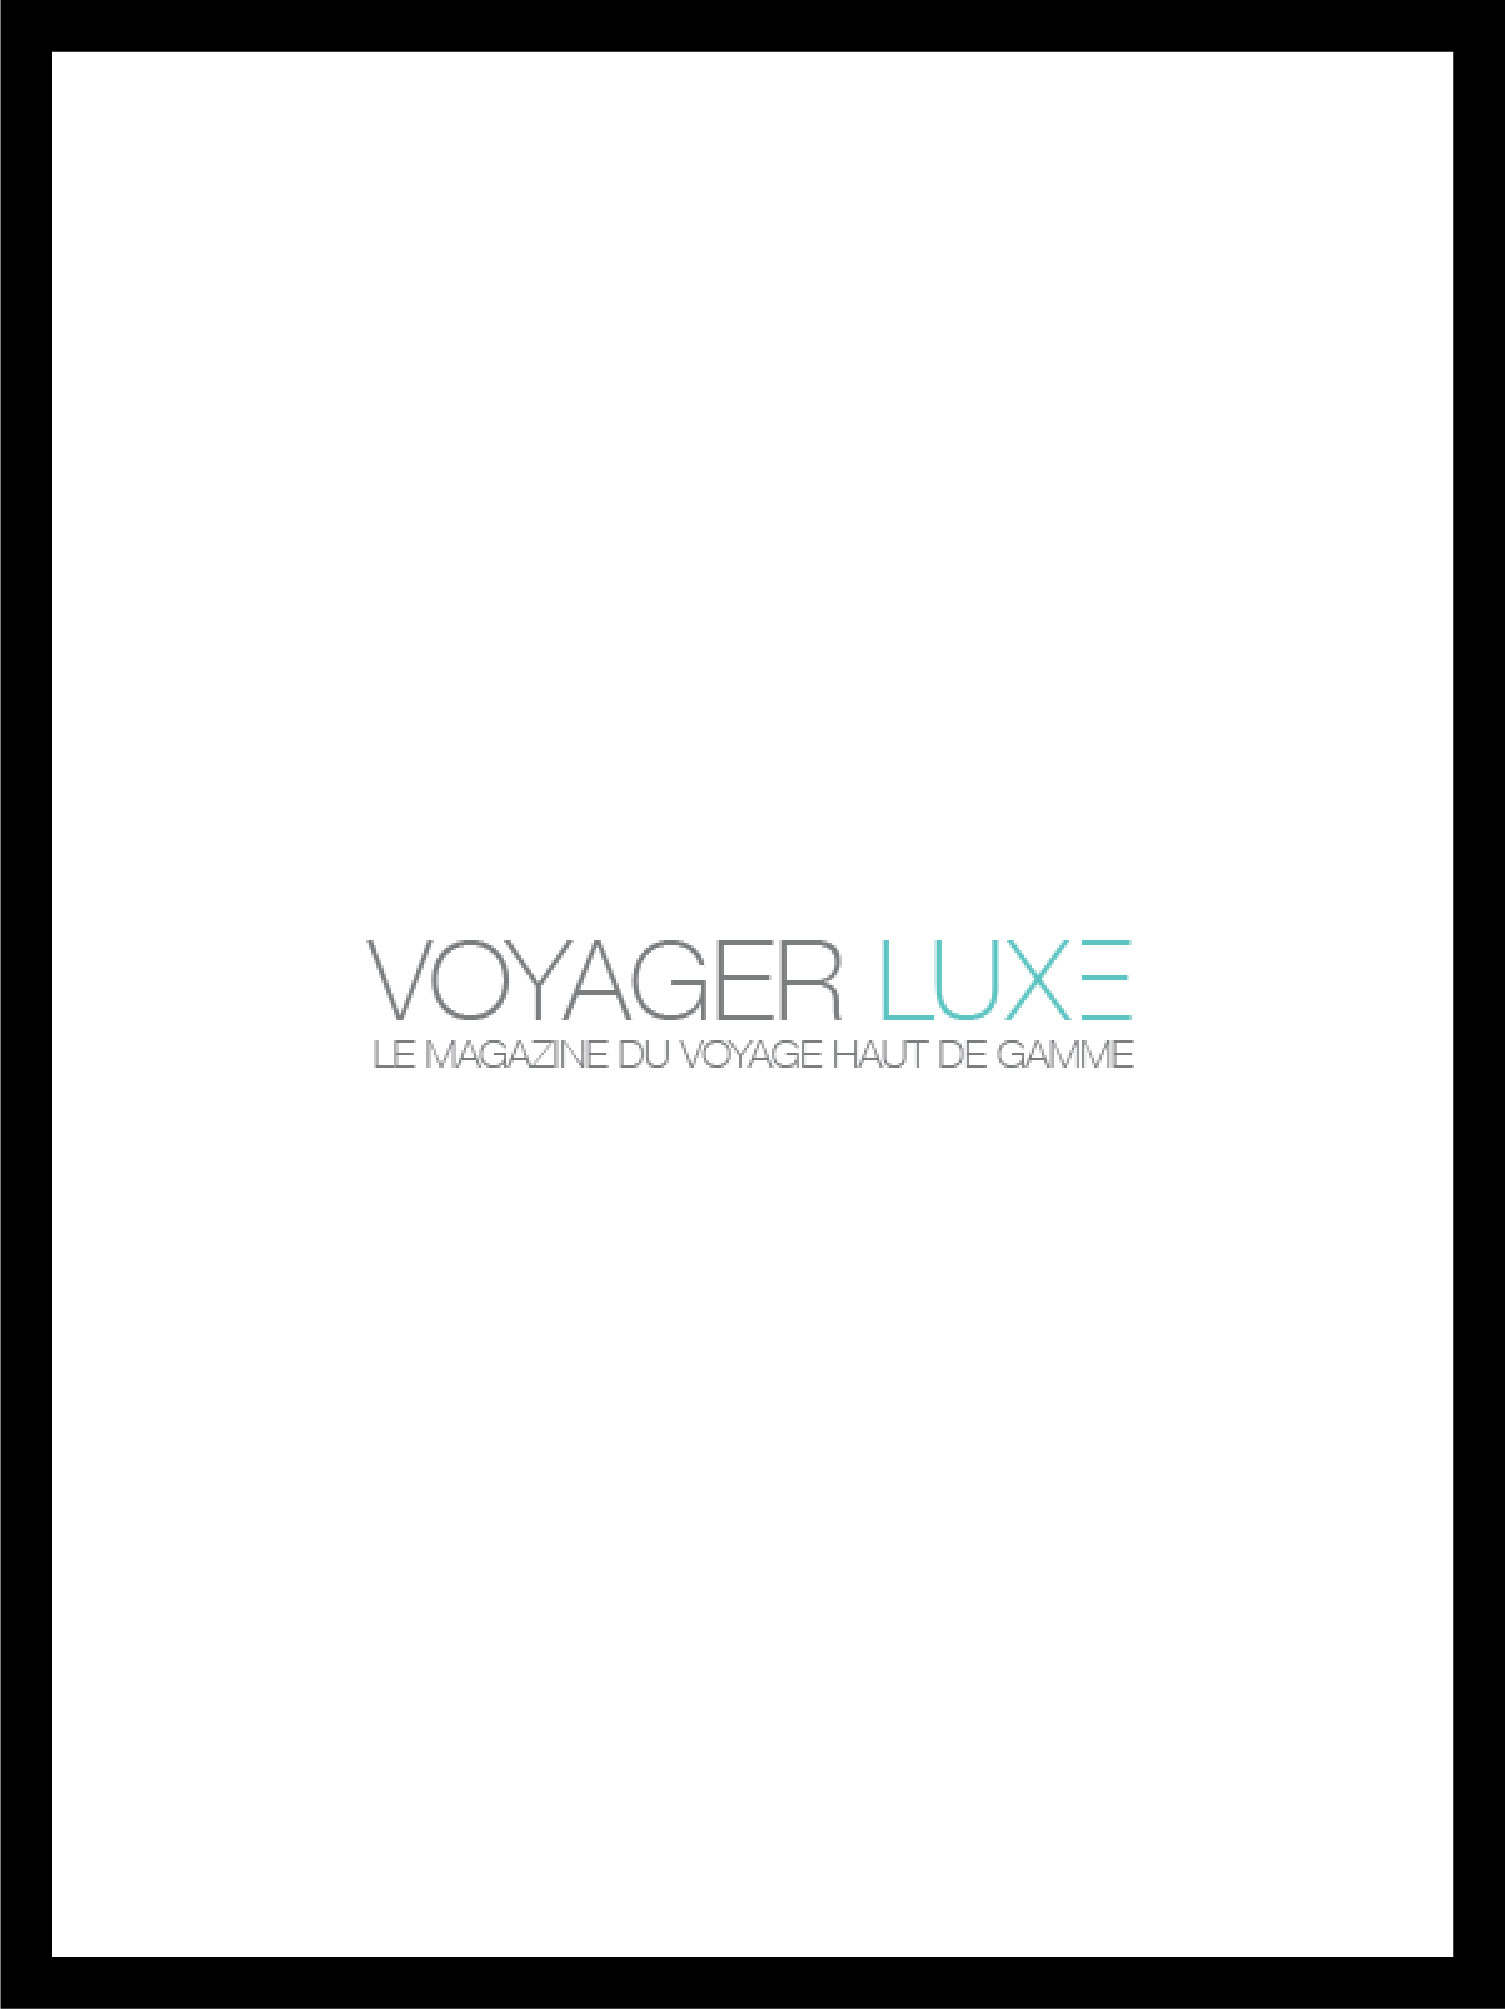 cover and logo of the voyage luxe magazine